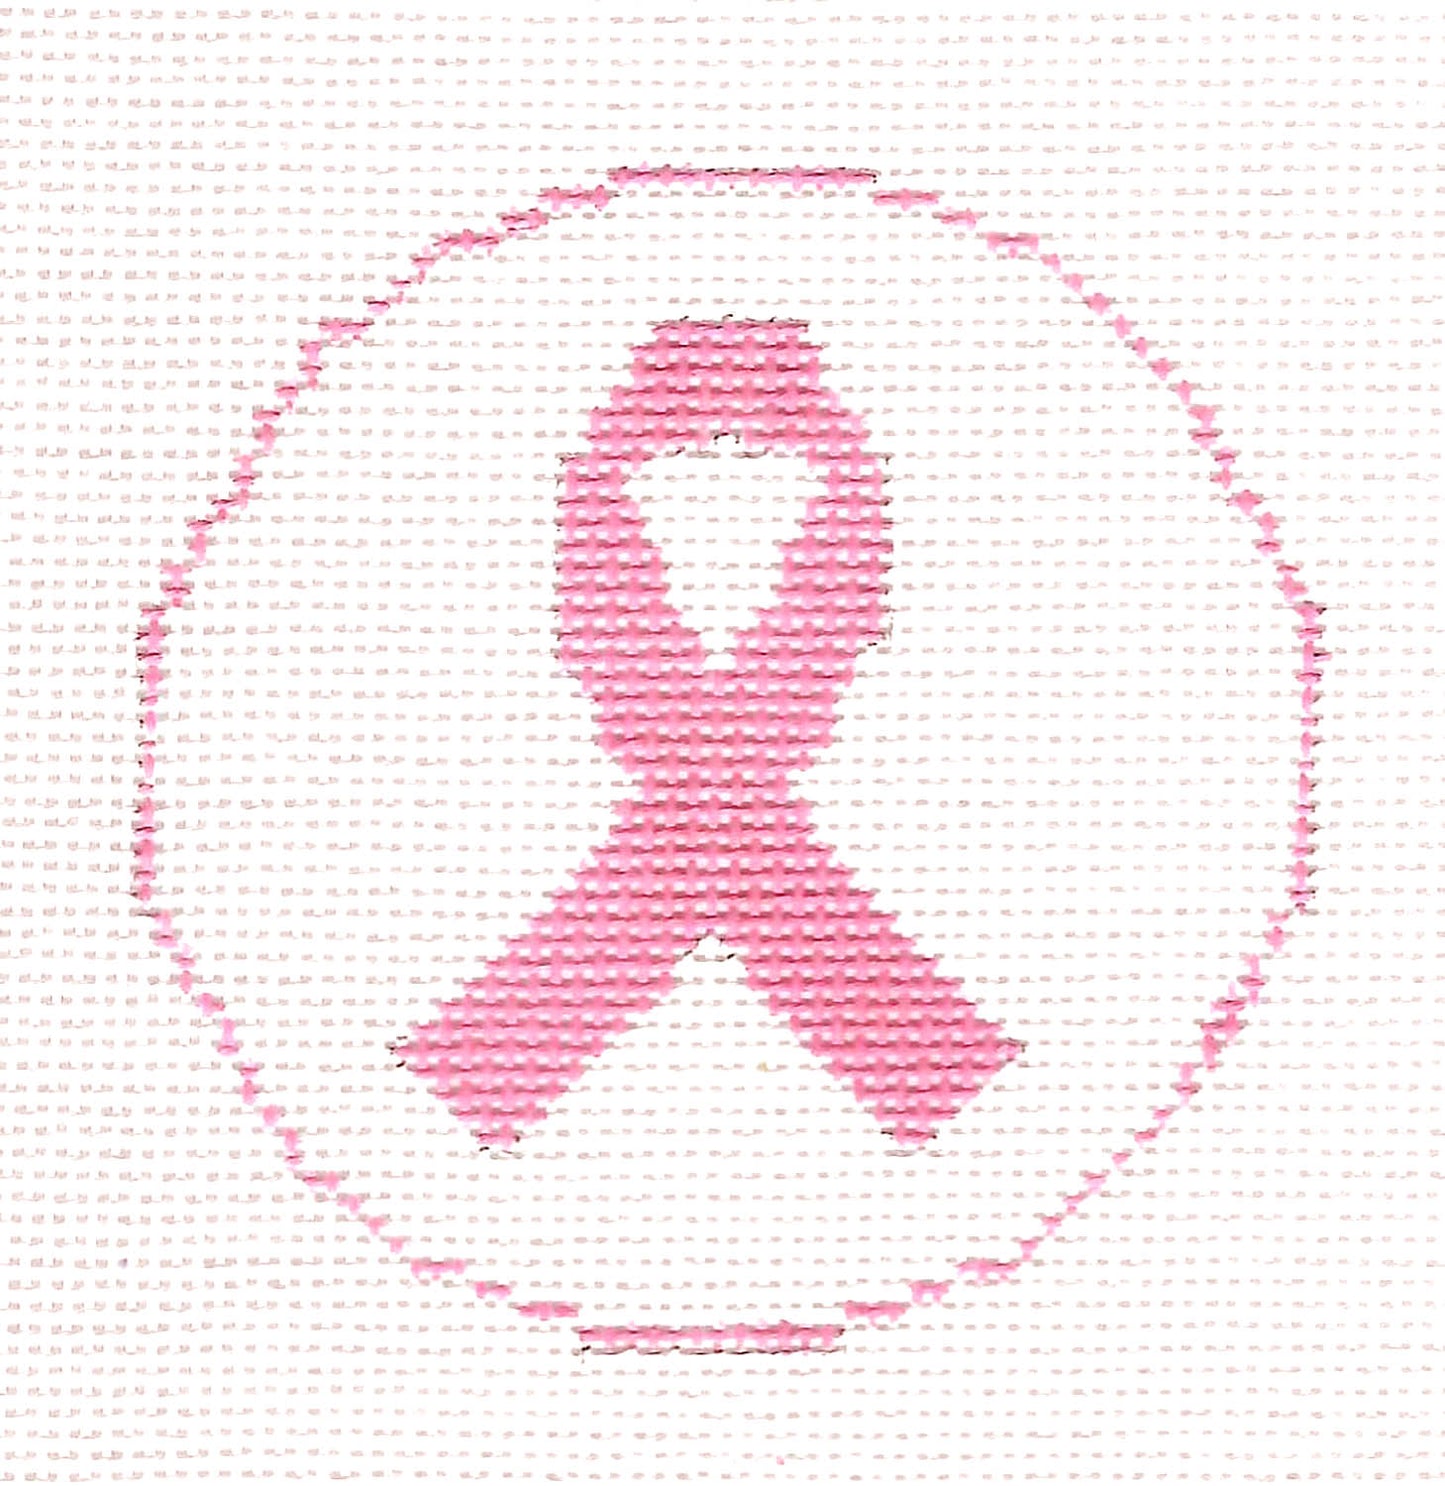 Pink Ribbon of Hope  3" Round handpainted 18 mesh Needlepoint Canvas Ornament by LEE